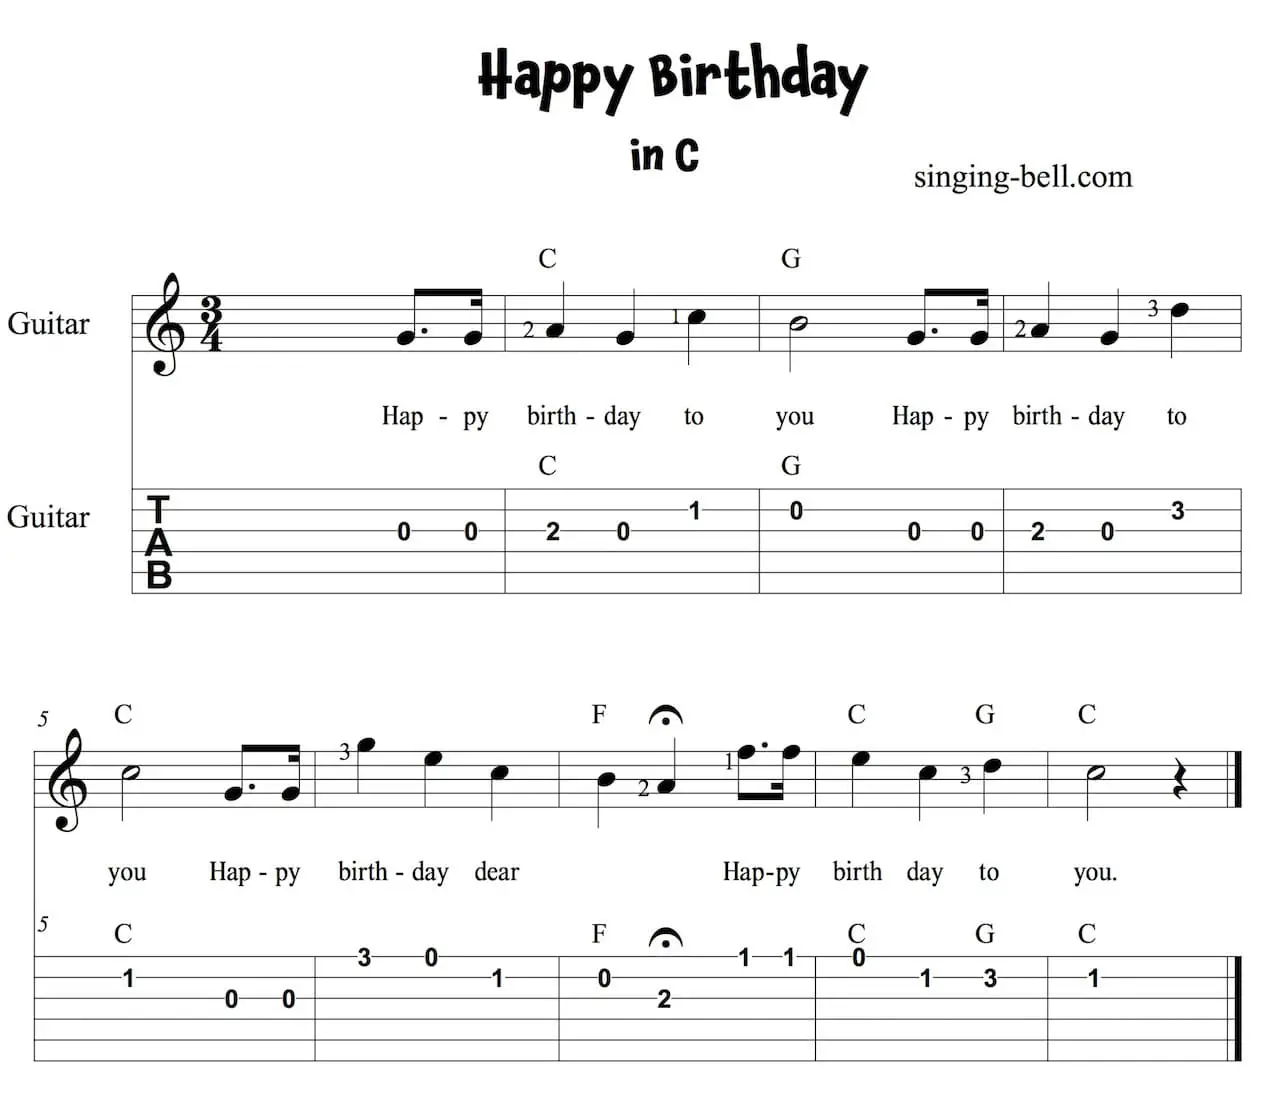 Happy Birthday Song easy Guitar Sheet Music with Notes and Tablature in C - version 1.